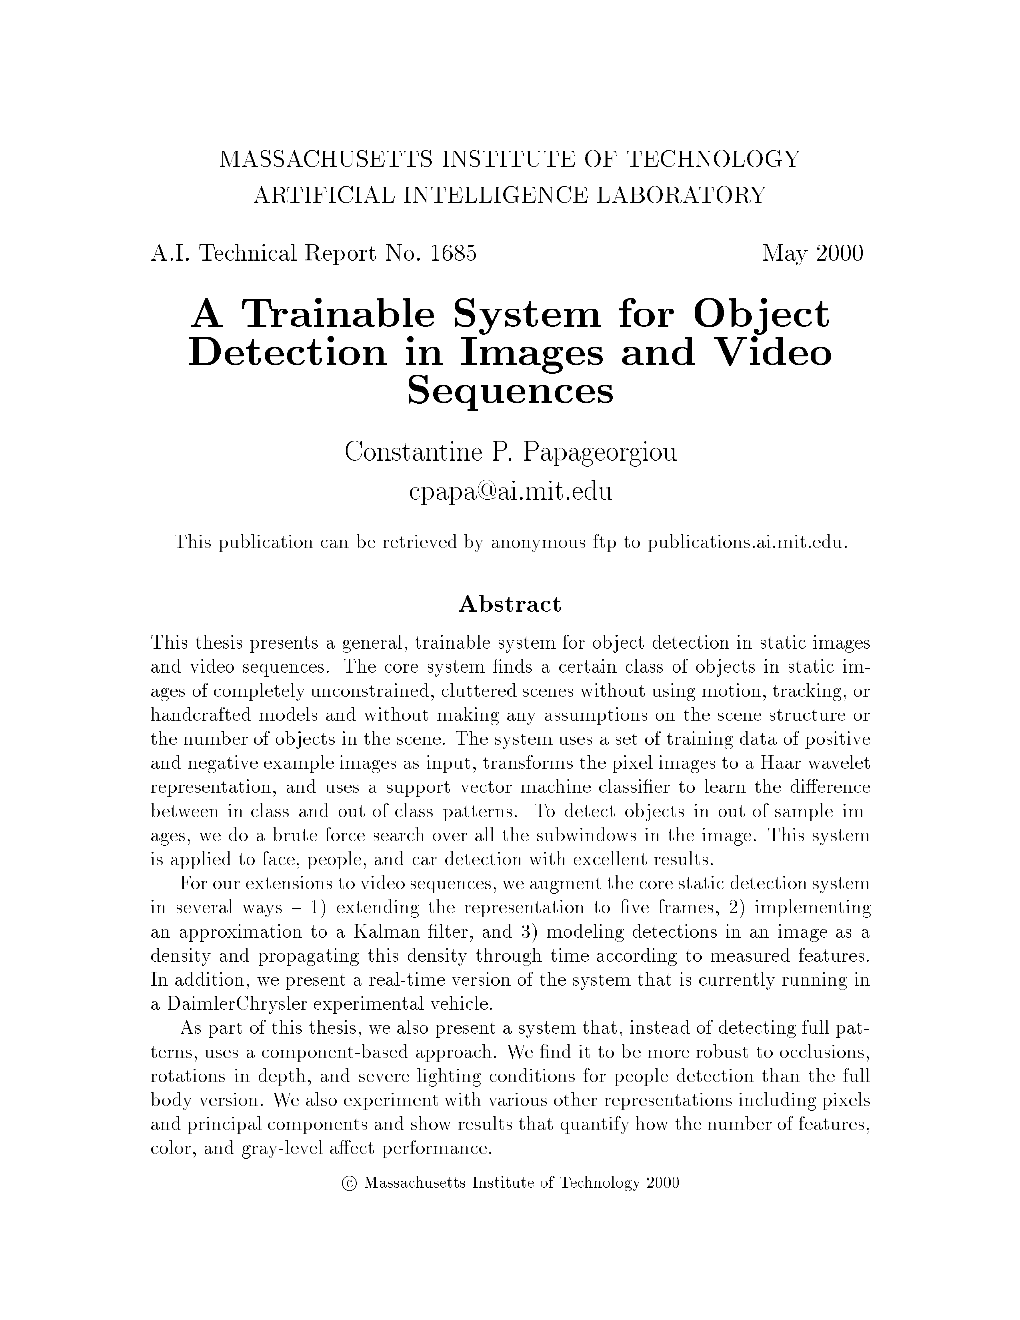 A Trainable System for Object Detection in Images and Video